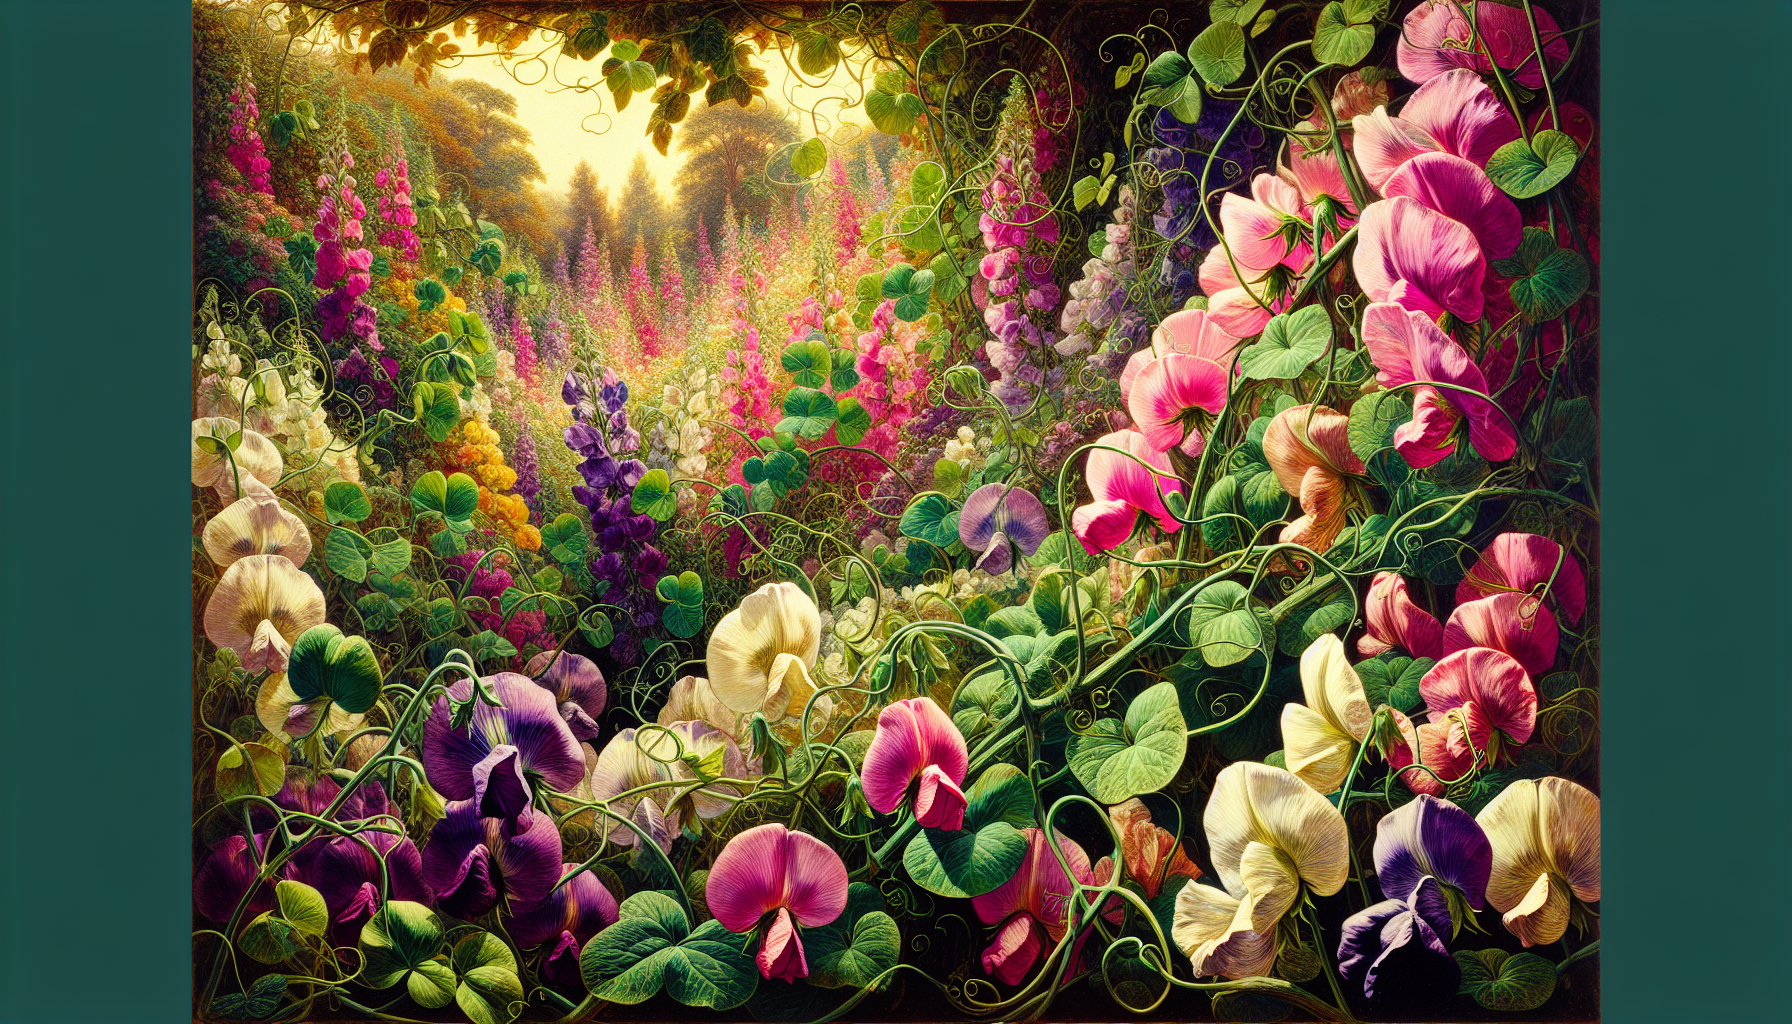 Illustration of colorful sweet peas in a garden